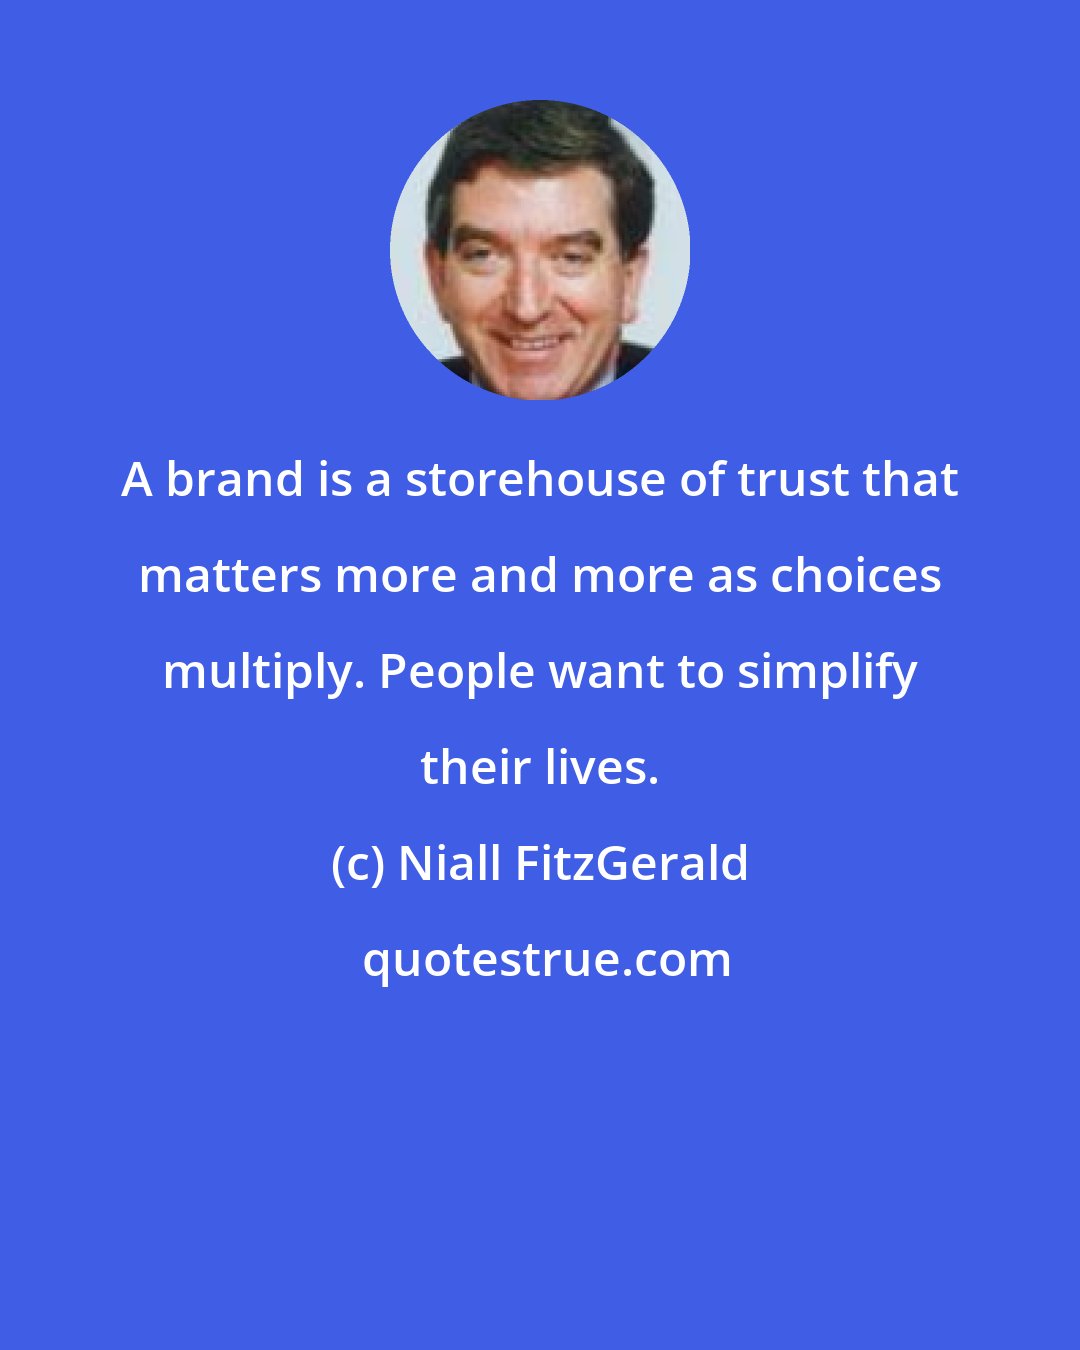 Niall FitzGerald: A brand is a storehouse of trust that matters more and more as choices multiply. People want to simplify their lives.